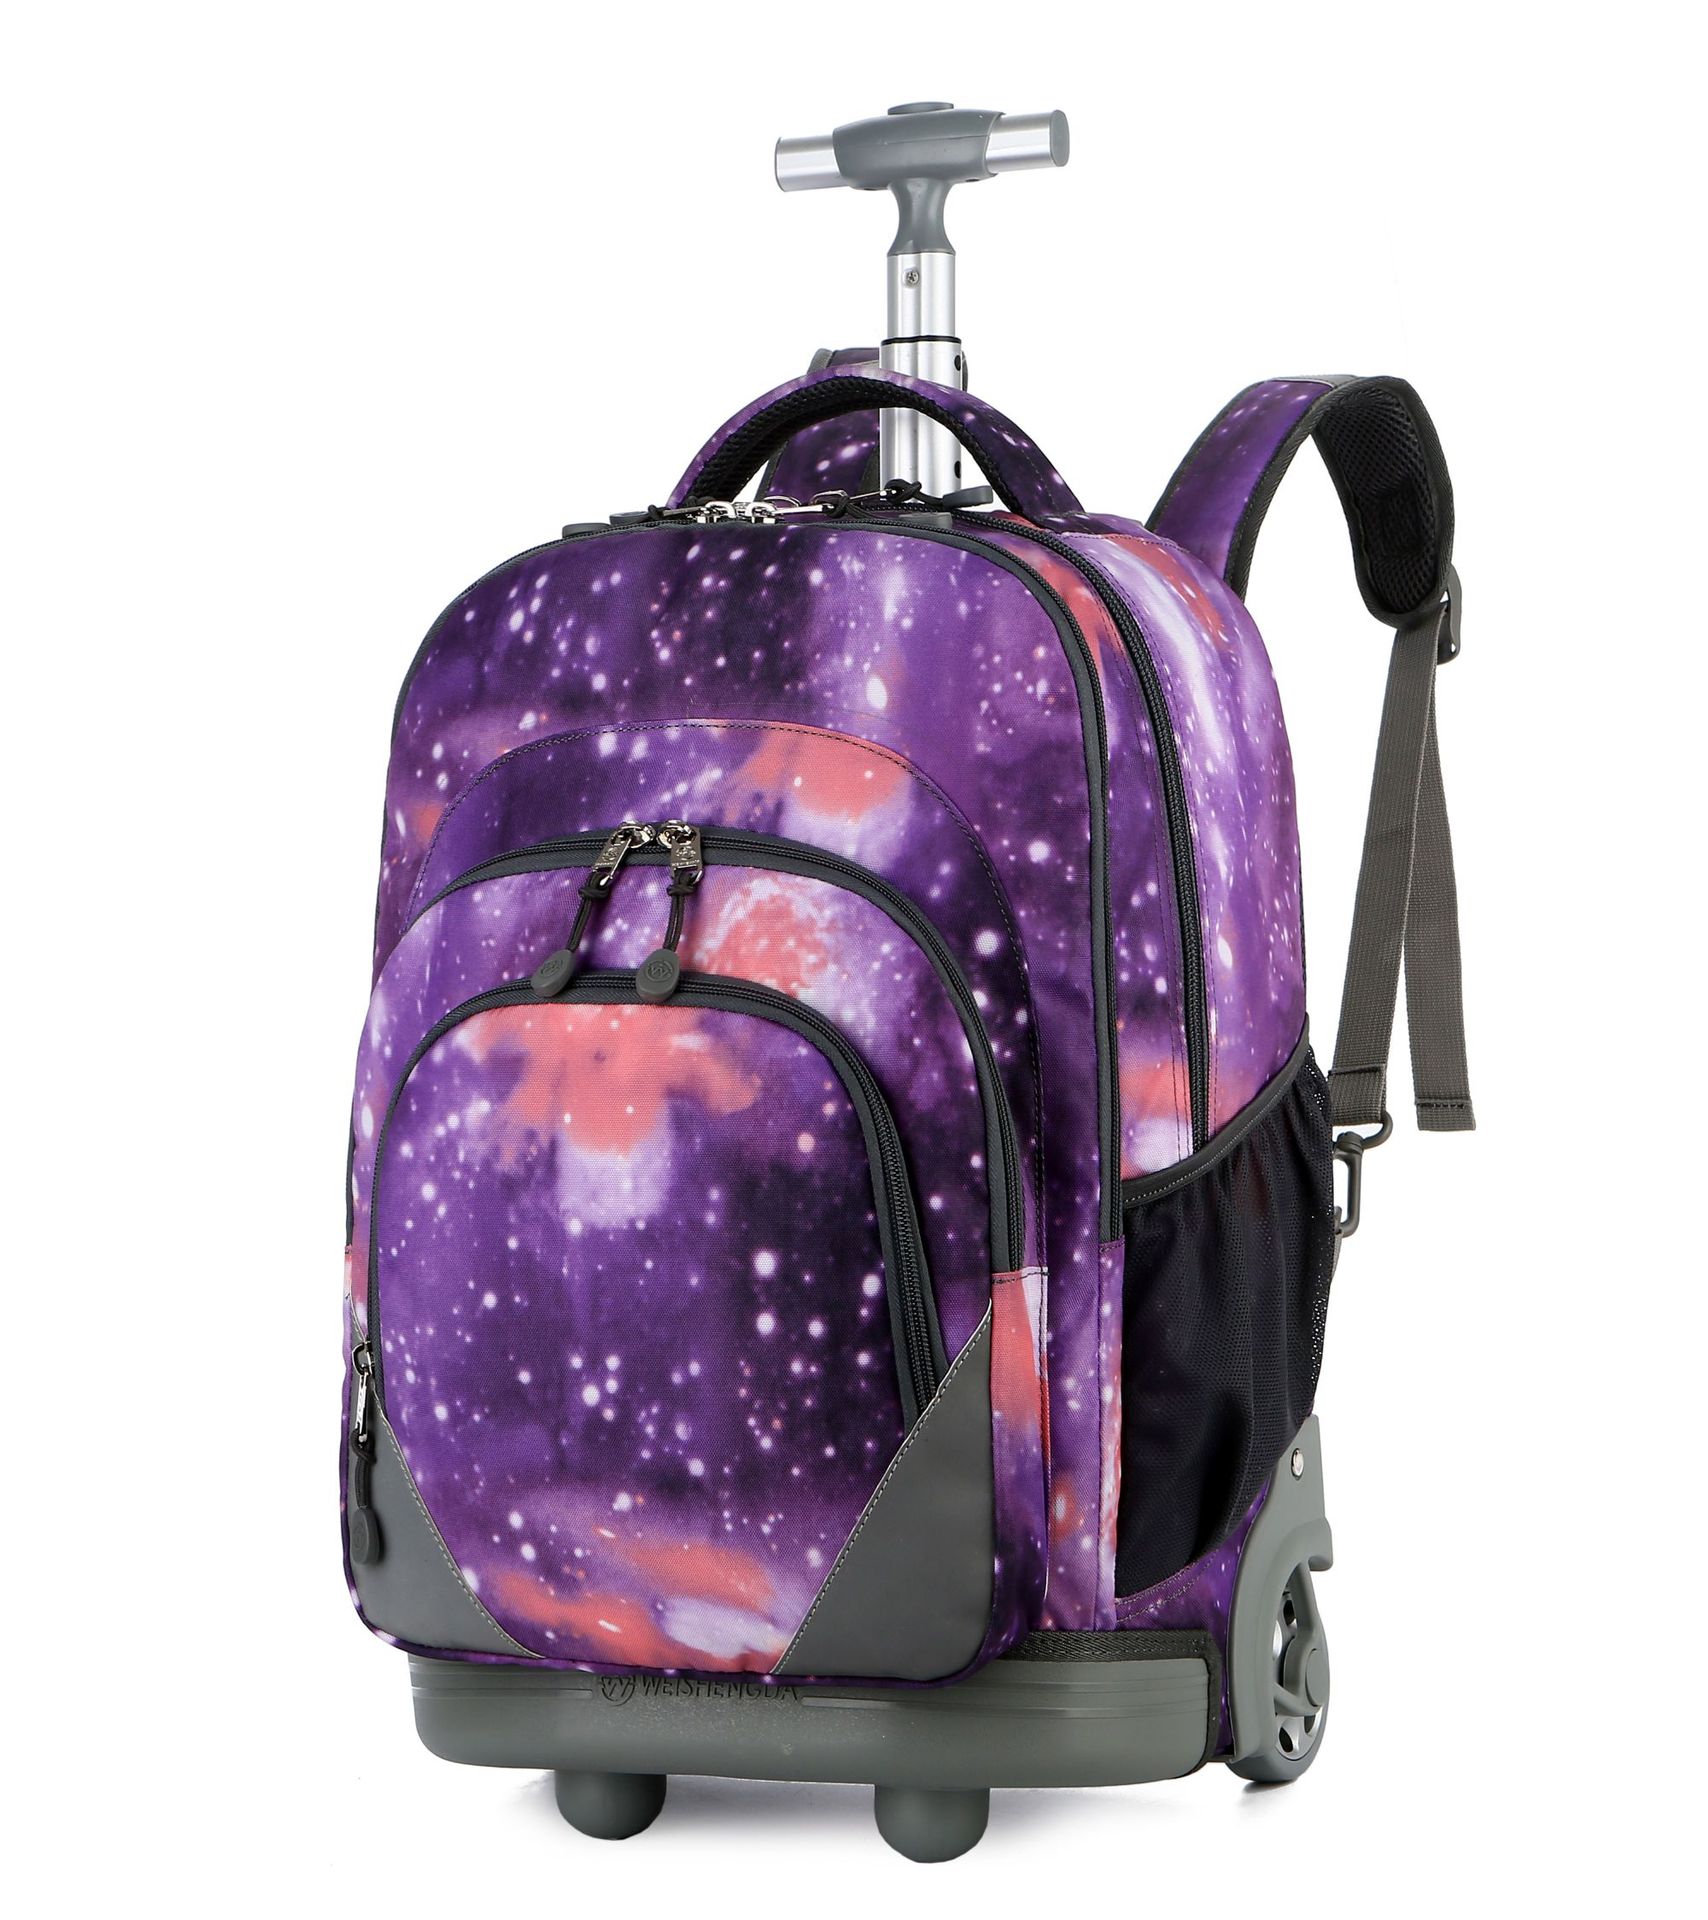 New Back Pull Dual-Purpose Trolley Schoolbag Primary and Secondary School Backpack Spine Protection Burden Reduction Large Capacity Multi-Interlayer Multi-Pattern